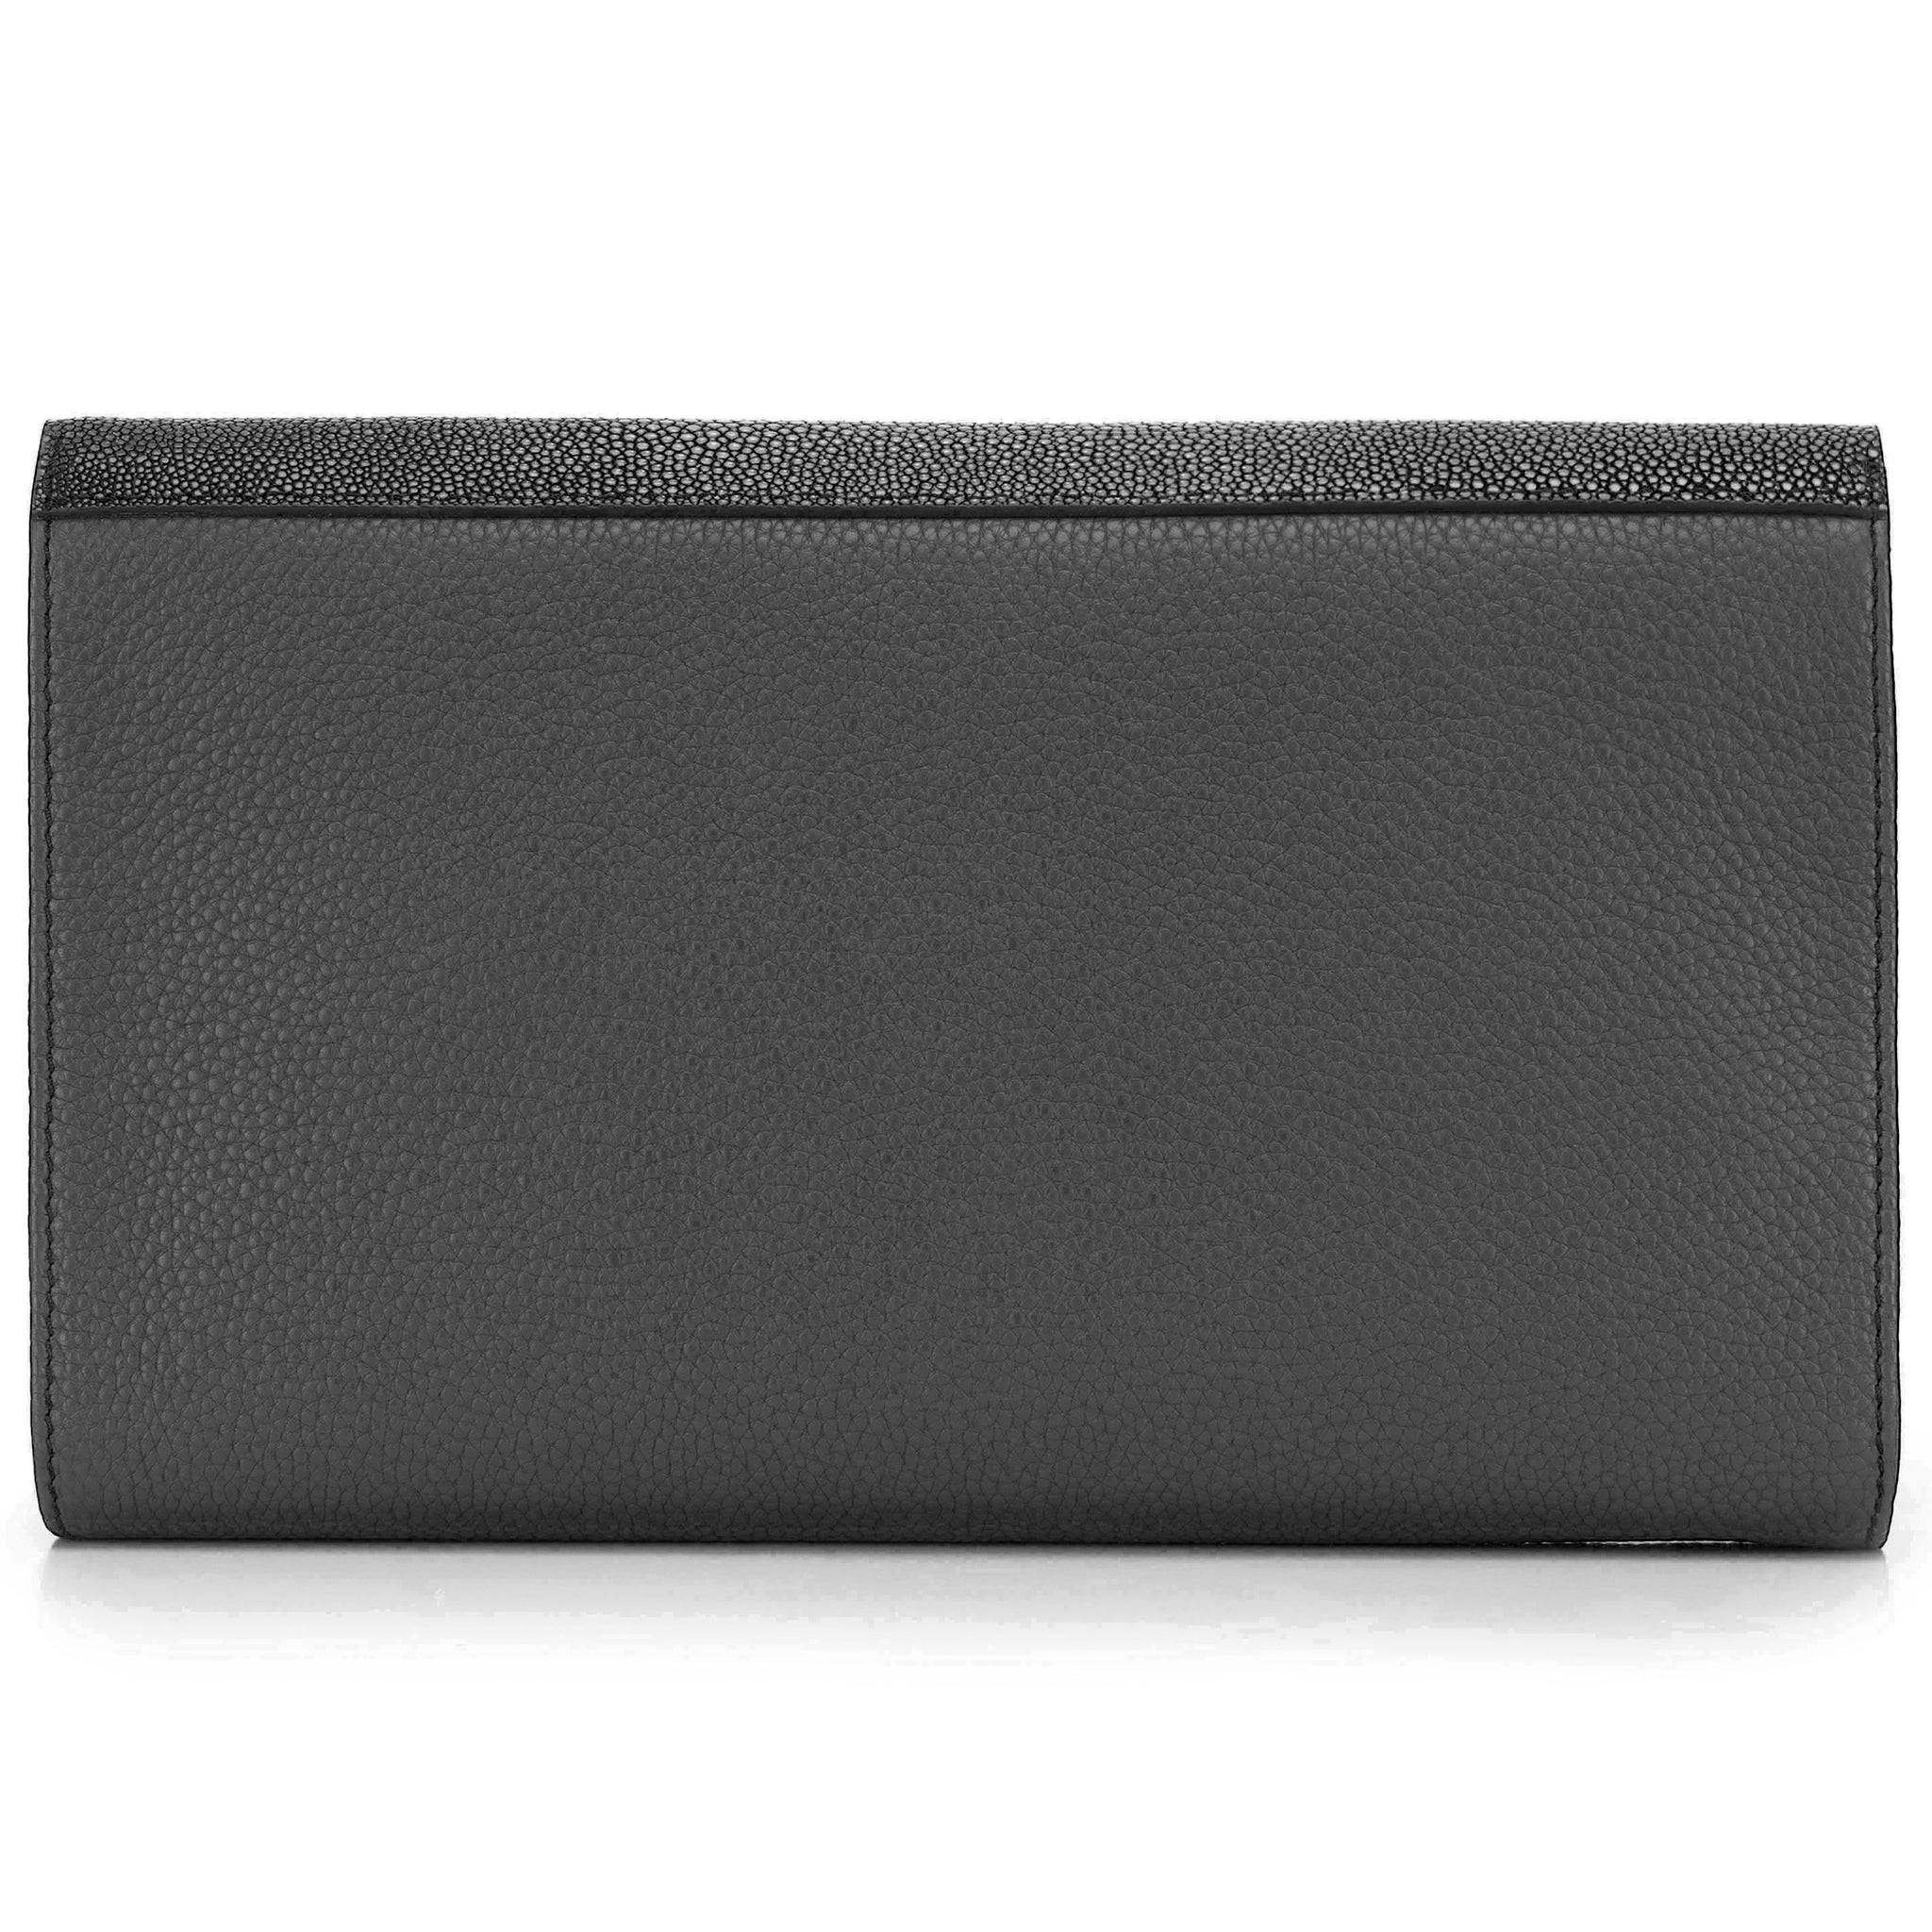 Black Shagreen Black Leather Body Detachable Chain Holly Oversize Clutch Back View - Vivo Direct